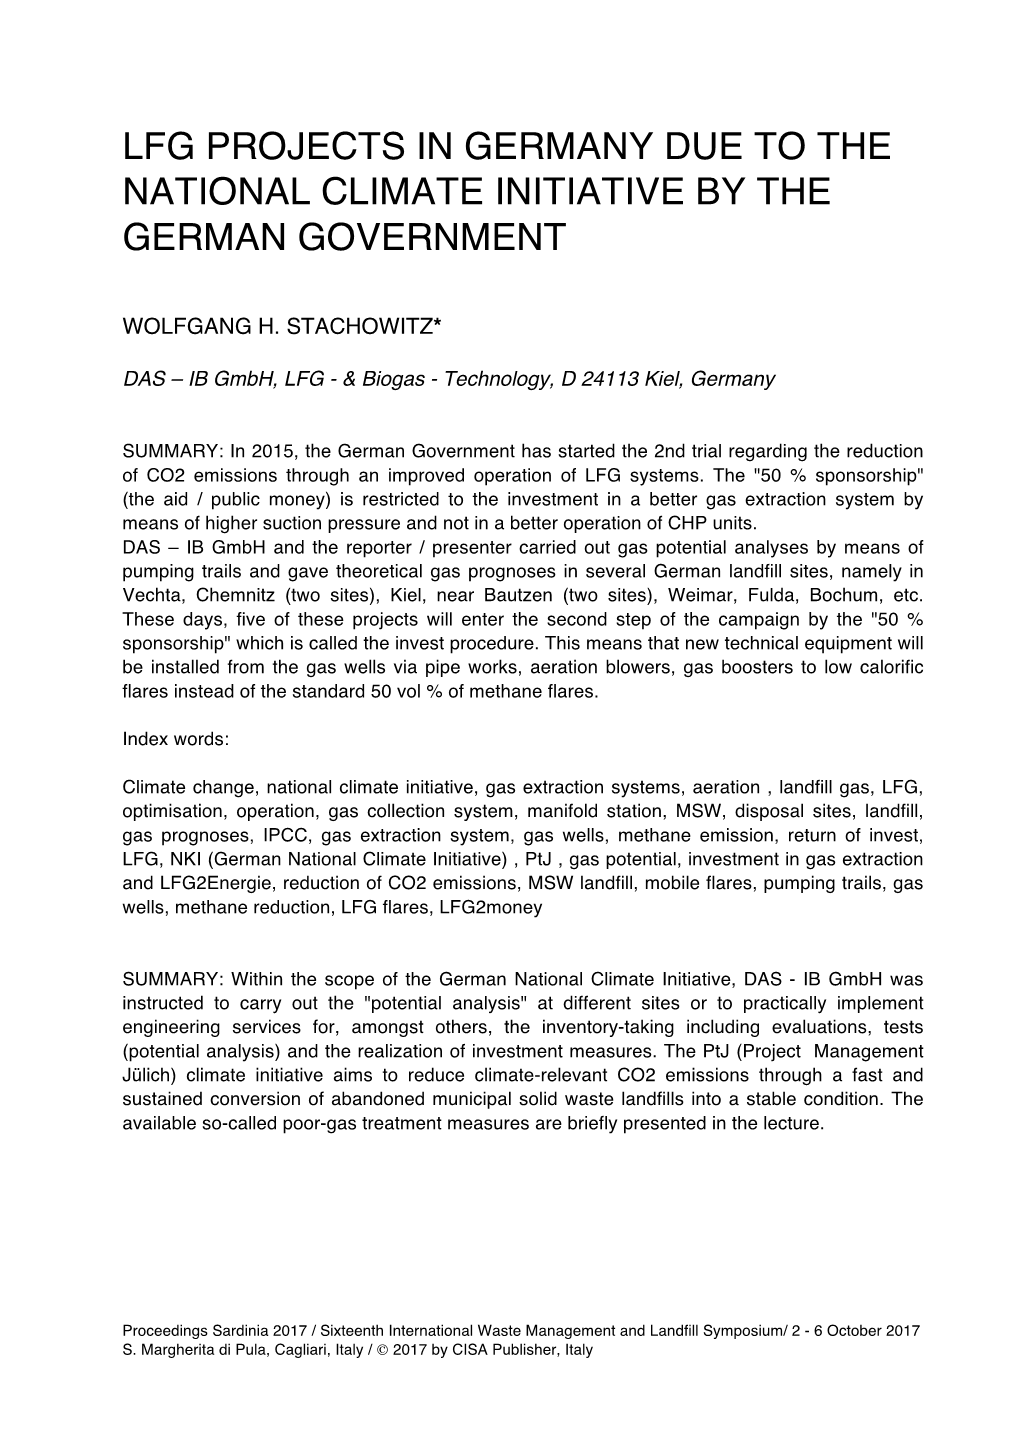 Lfg Projects in Germany Due to the National Climate Initiative by the German Government